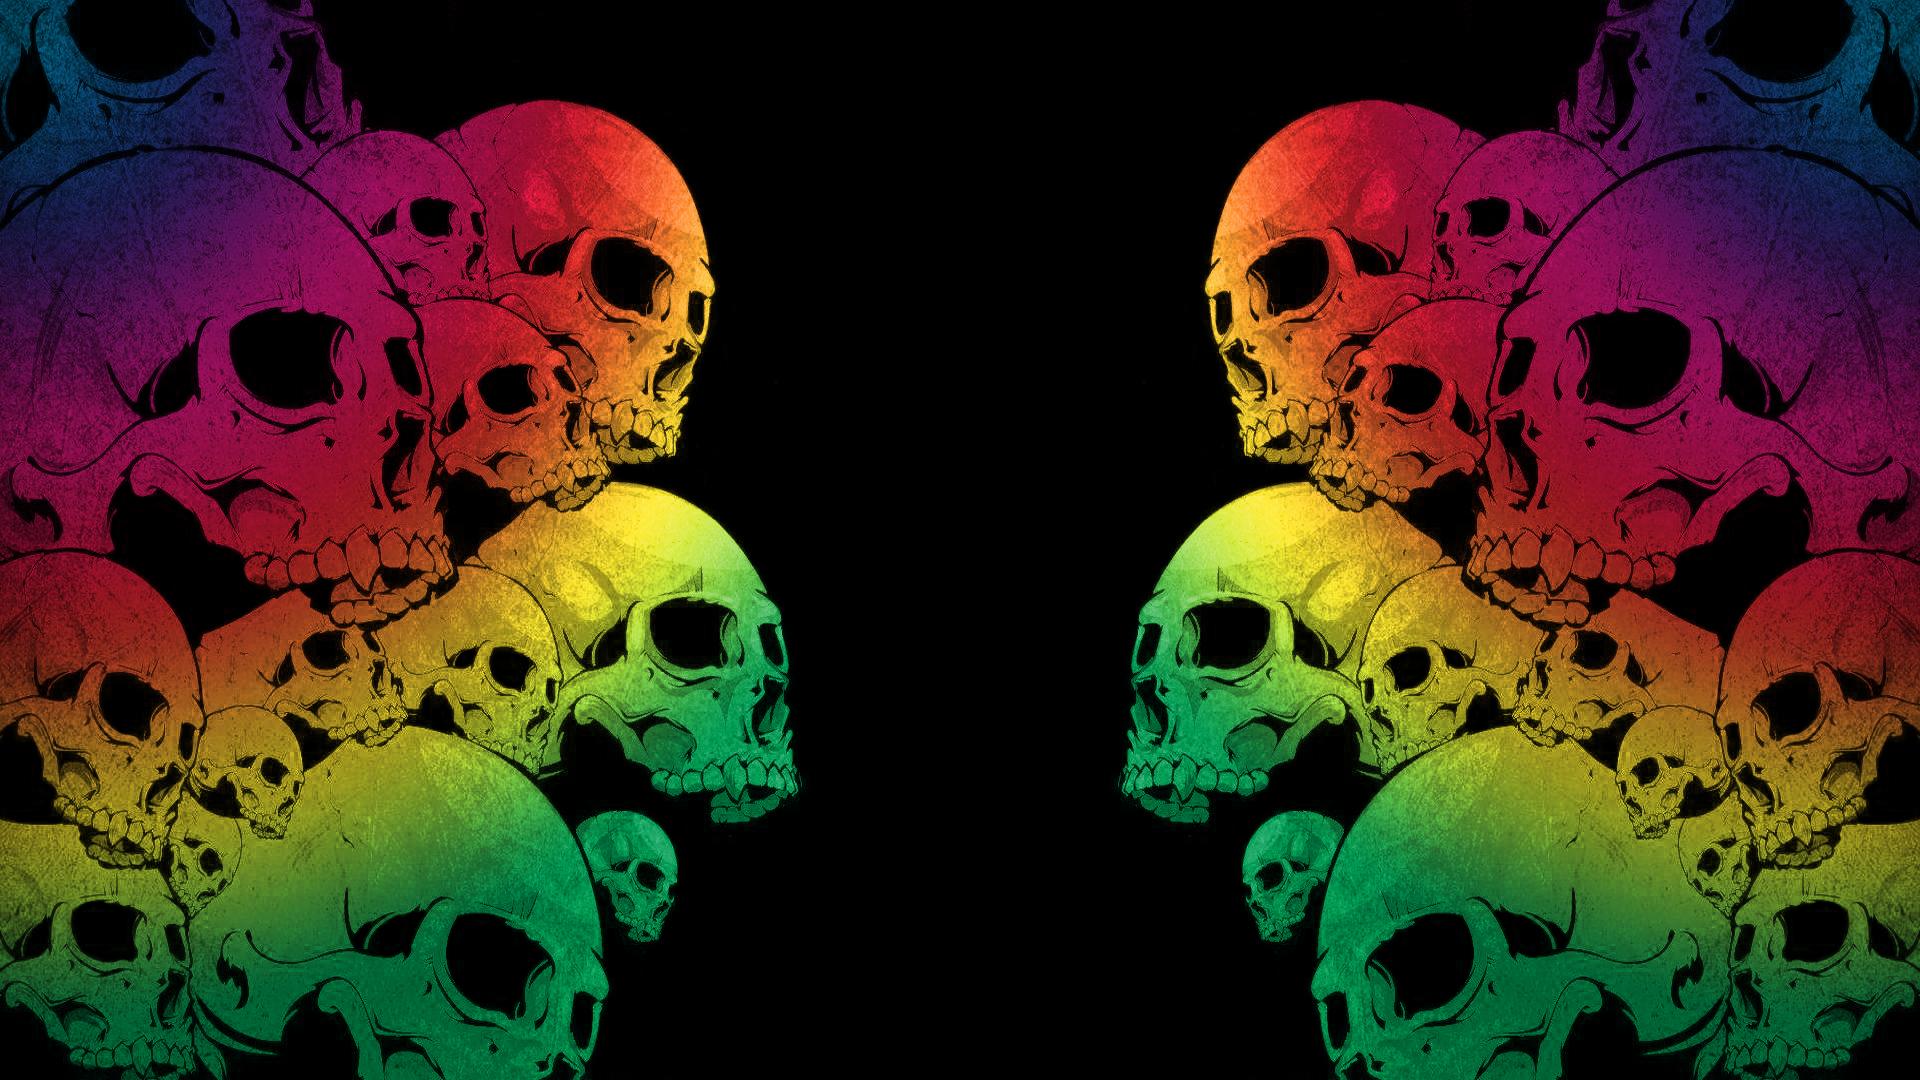 skull wallpapers colors